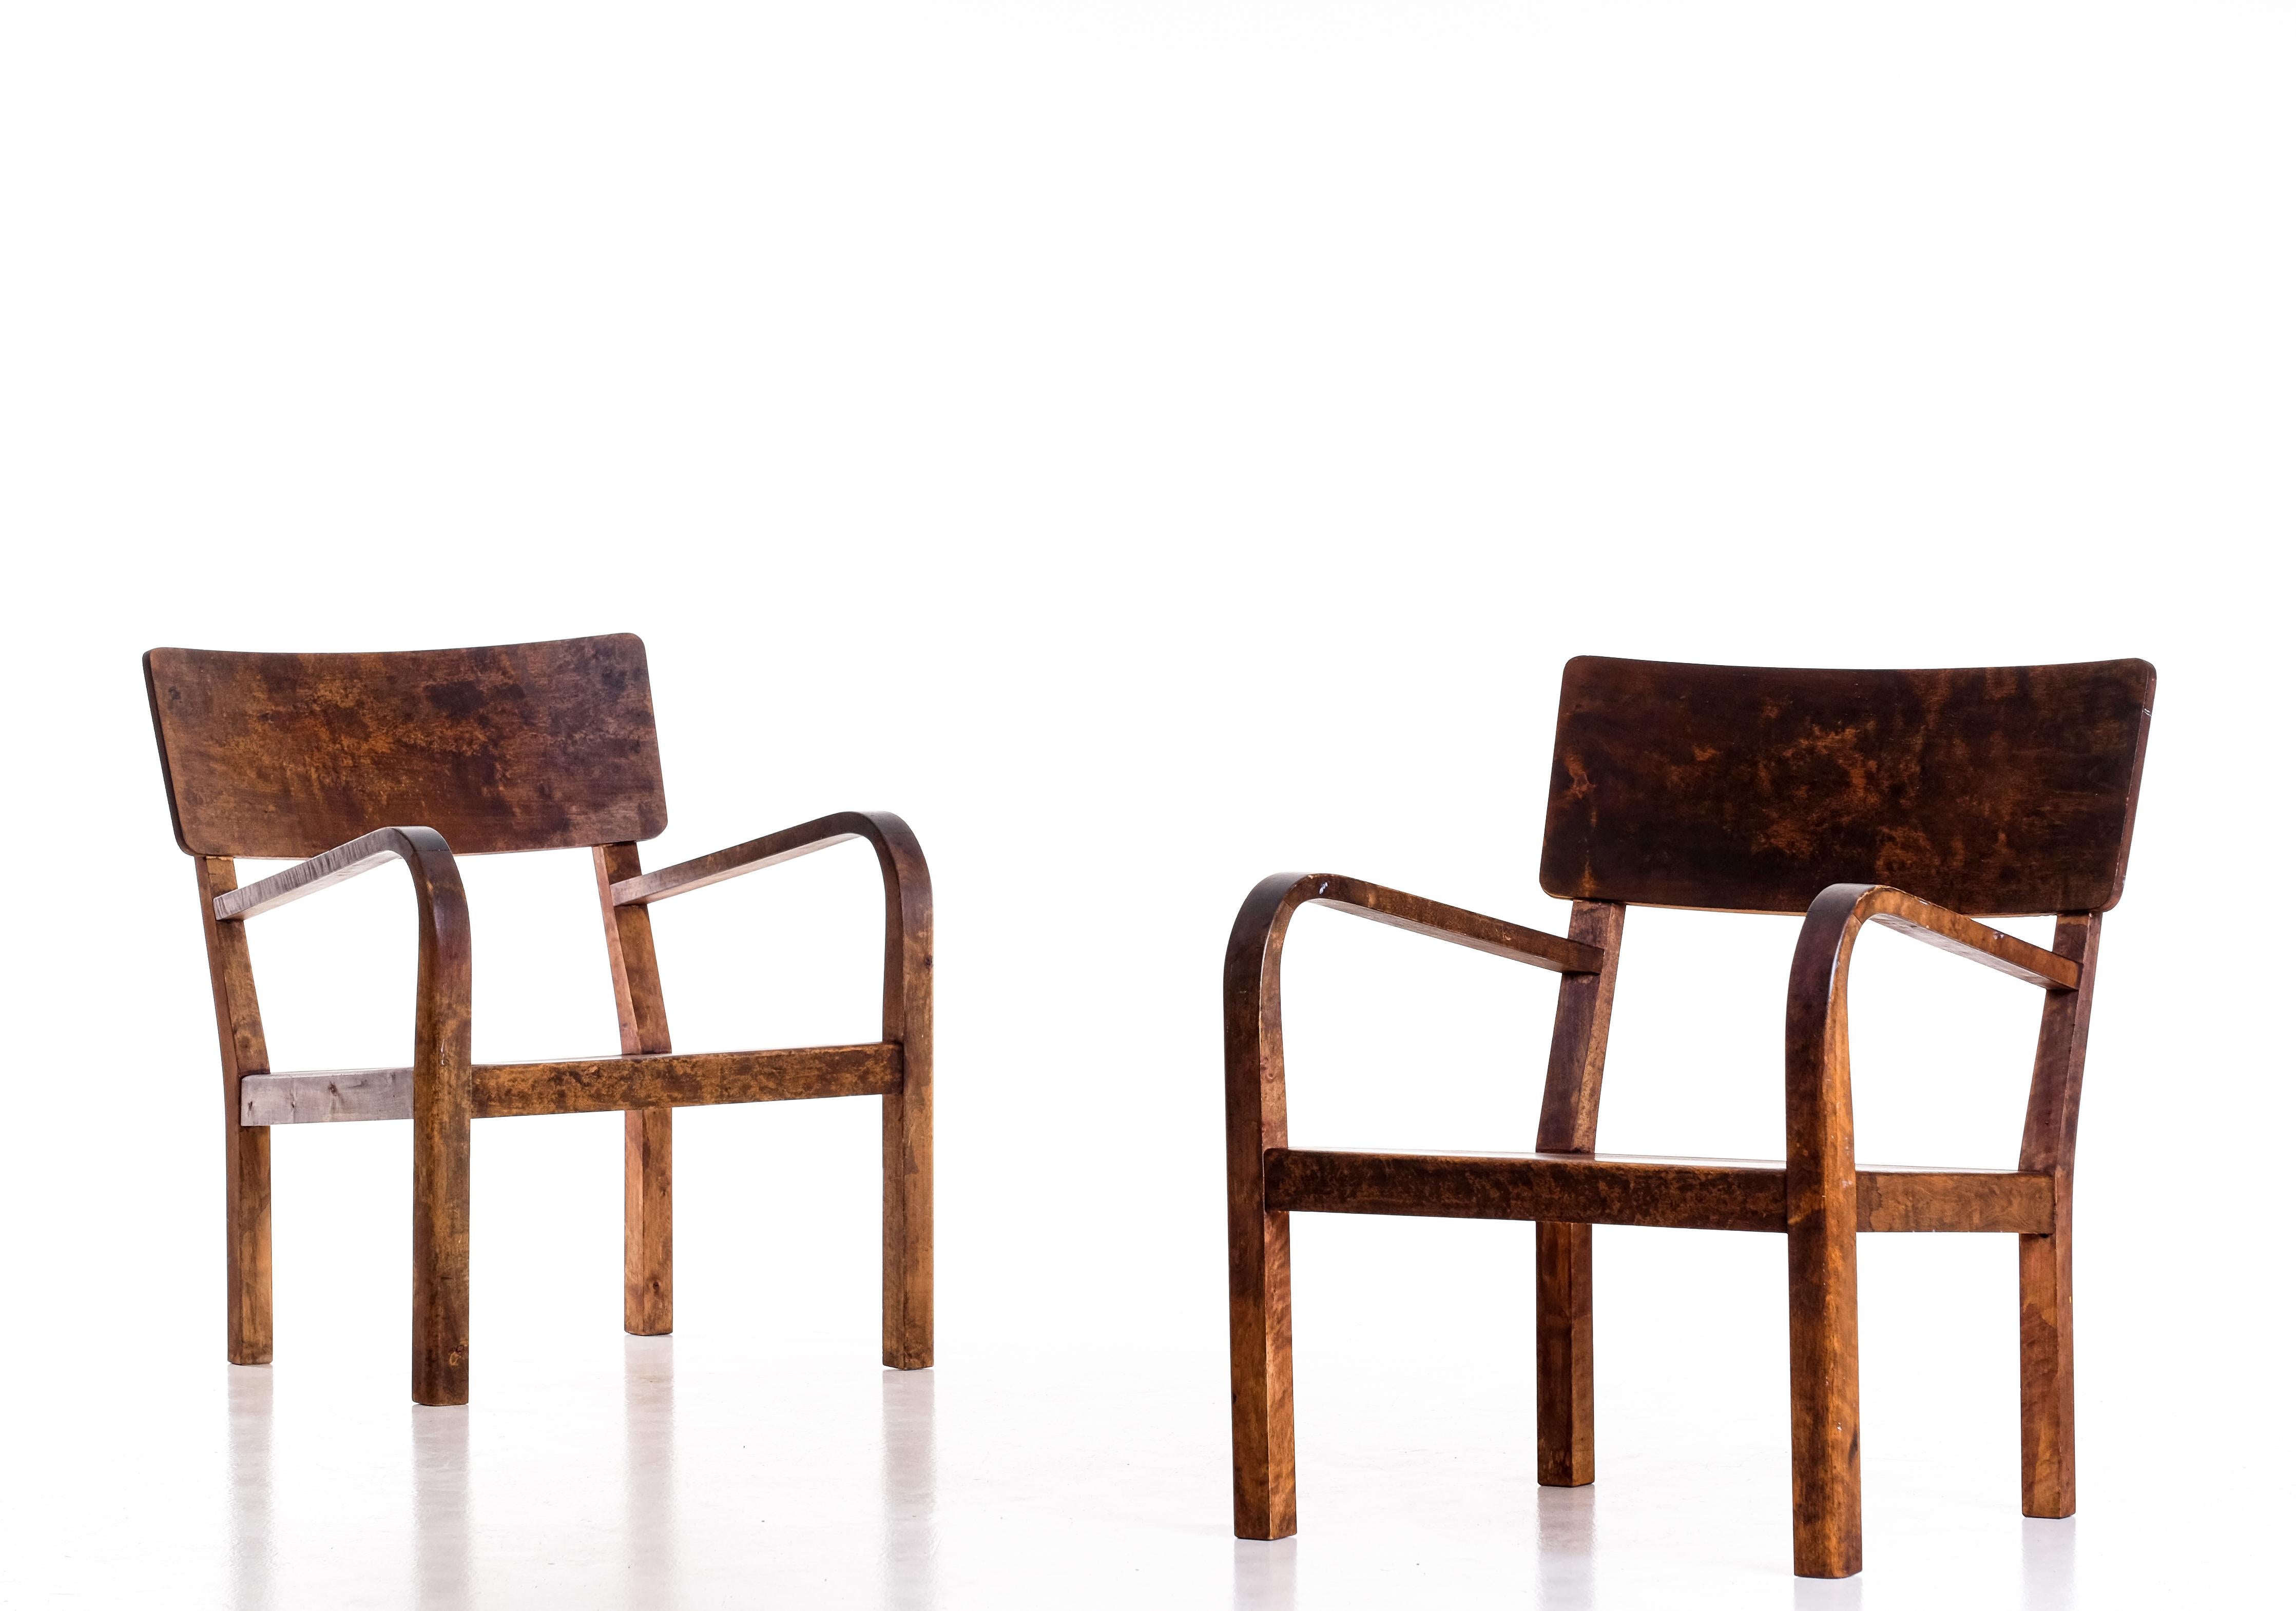 Pair of Swedish easy chairs in birch, 1950s.
Good condition with small signs of usage and patina.
  




